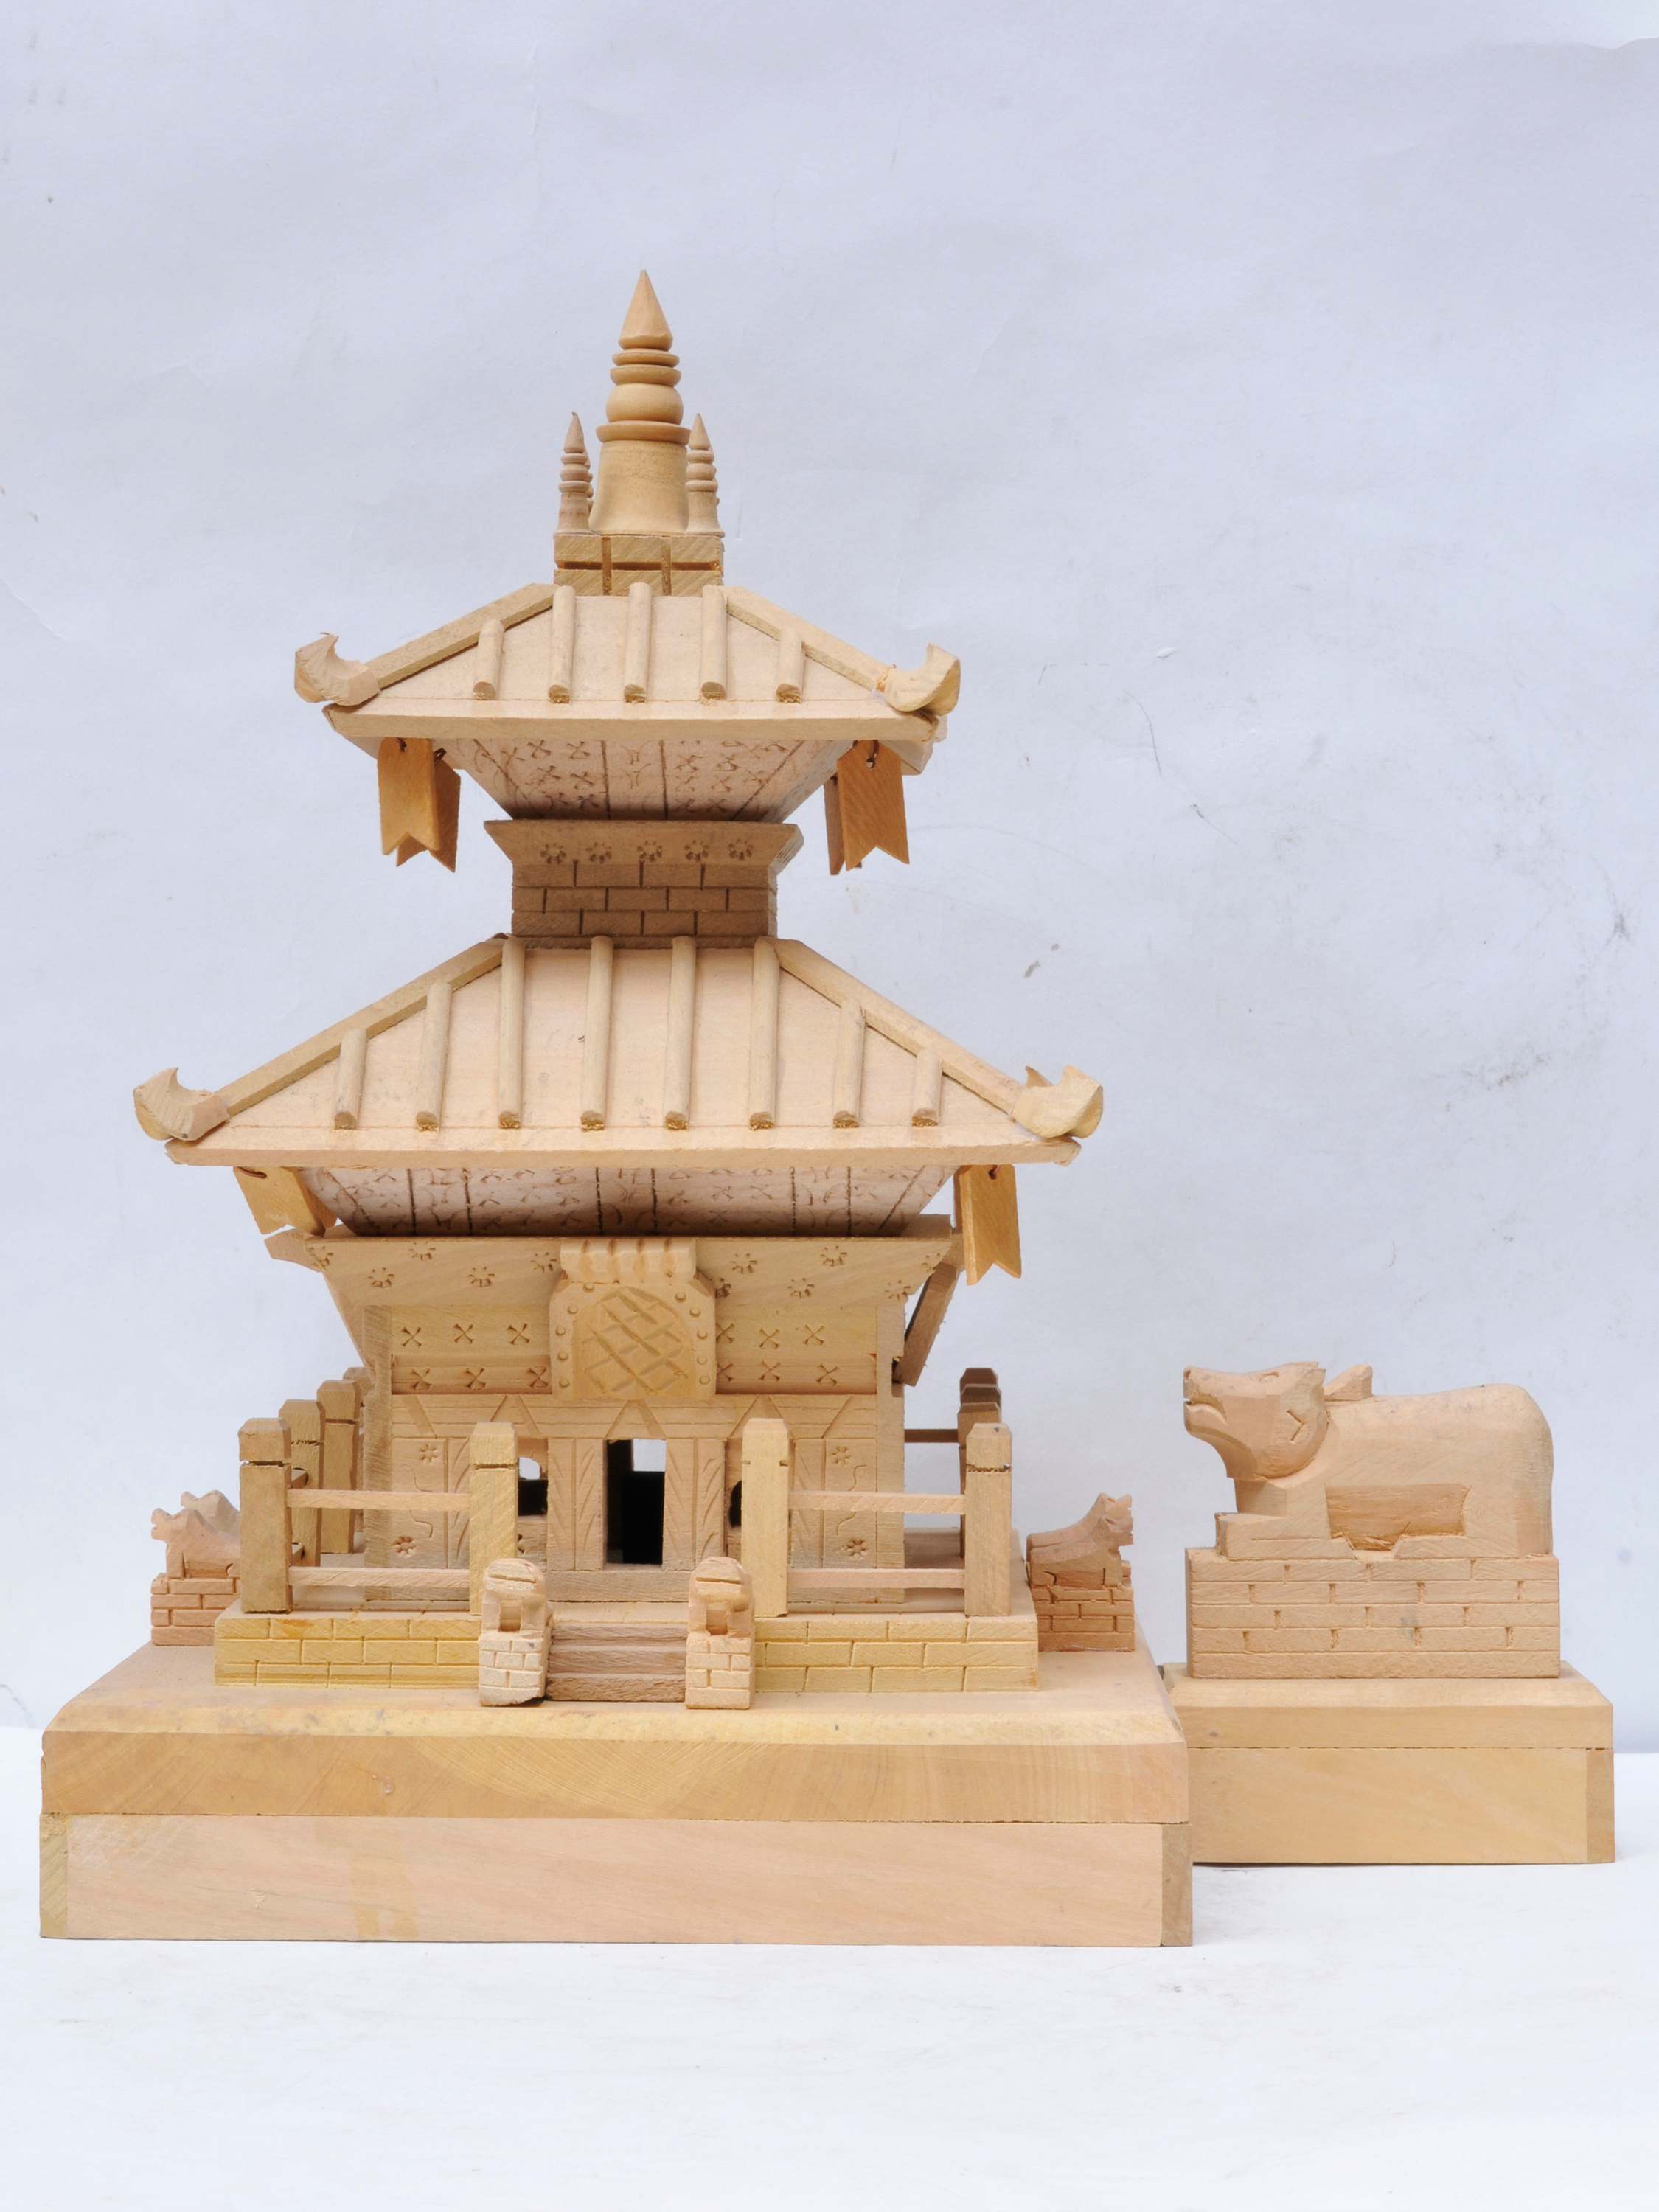 Nepali Handmade Replica Of Pashupatinath Temple, color Option: Chocolate Color And Black Color, natural Wood